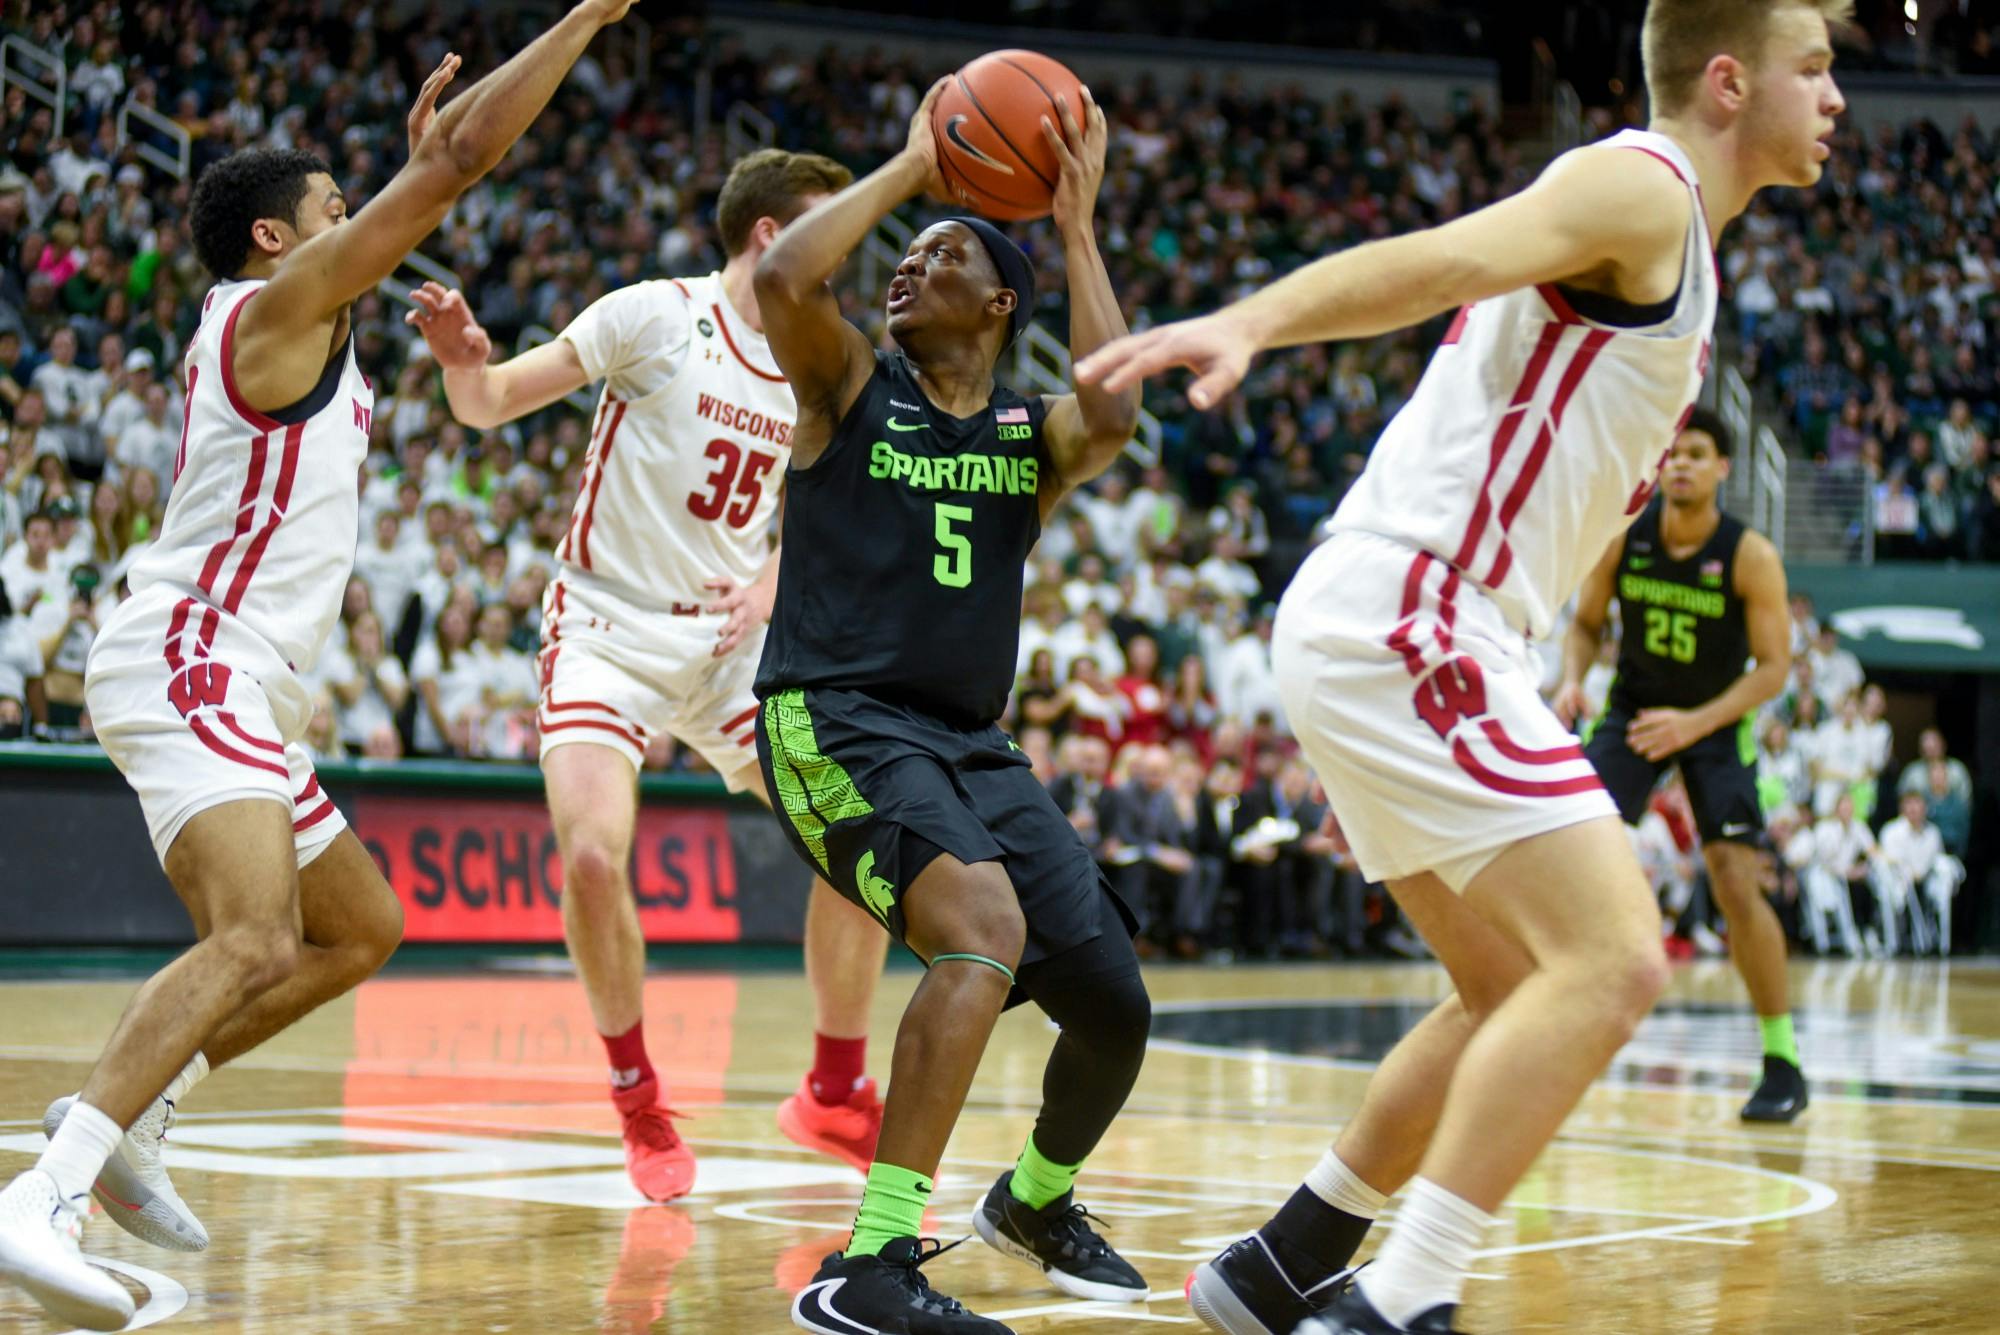 <p>Senior guard Cassius Winston (5) shoots the ball during the game against Wisconsin on Jan. 17, 2020 at Breslin Center. The Spartans defeated the Badgers, 67-55.</p>